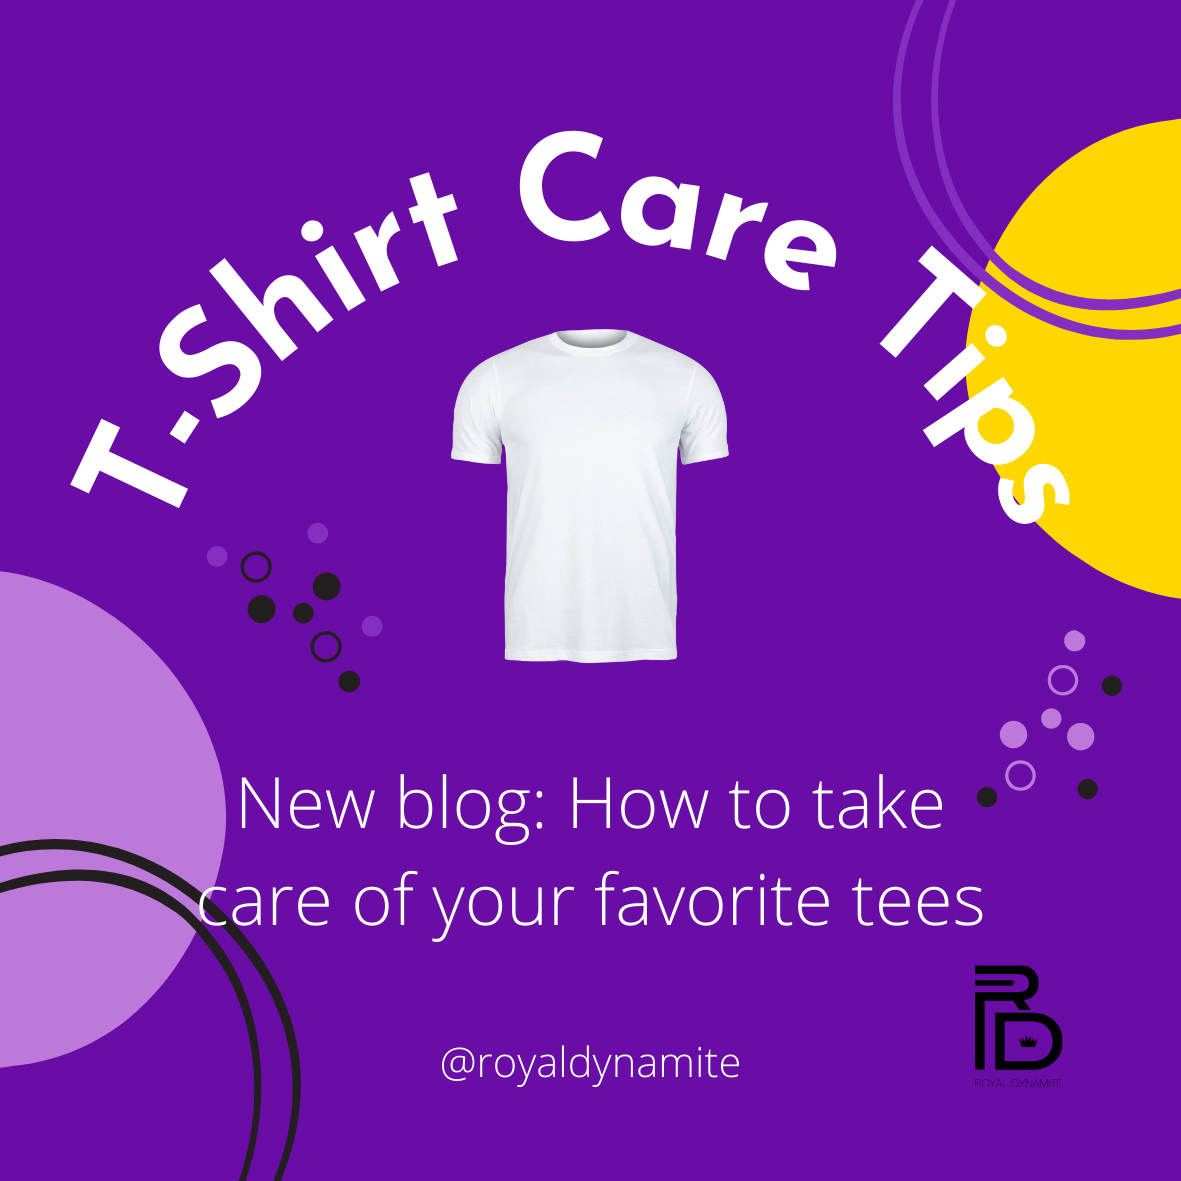 Want to take care of your favorite Tees? Here Are Our Top 5 T-Shirt Care Tips!